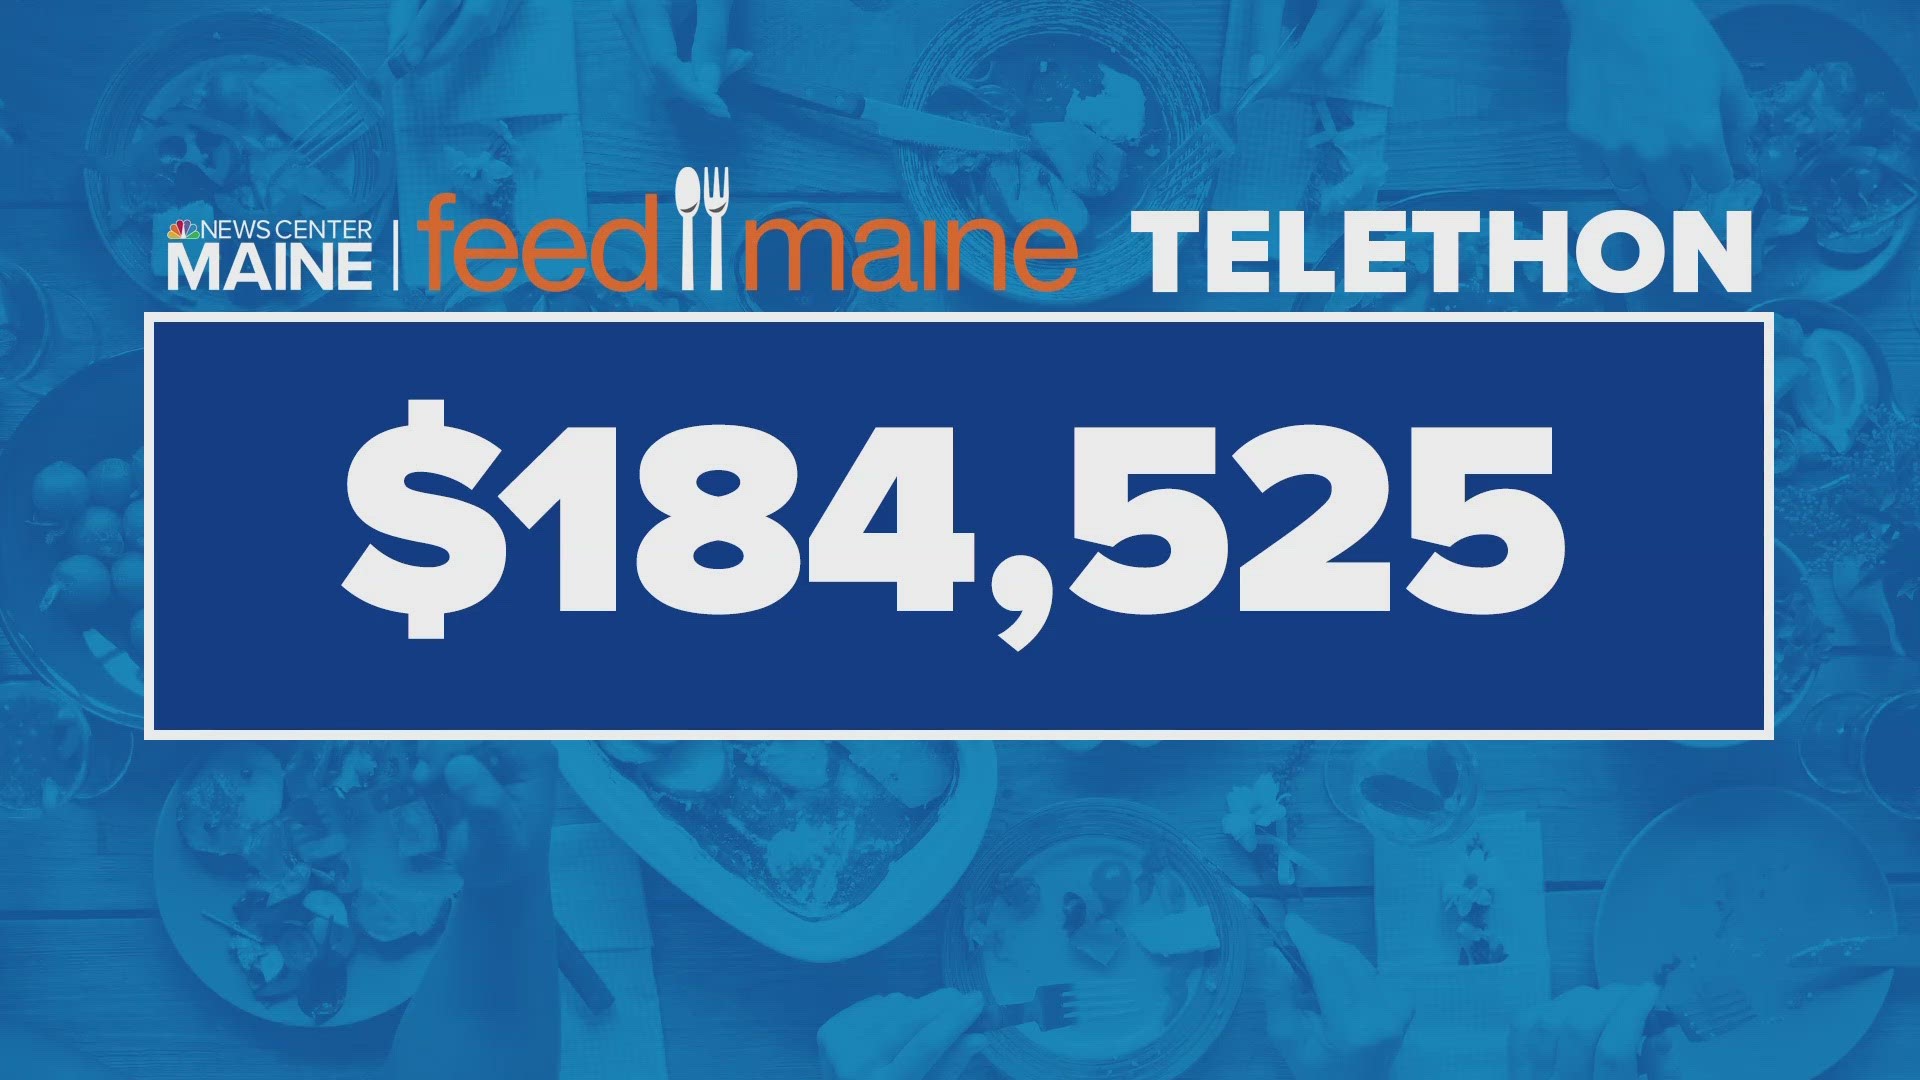 All donations go to the Good Shepherd Food Bank to help feed Mainers in need.